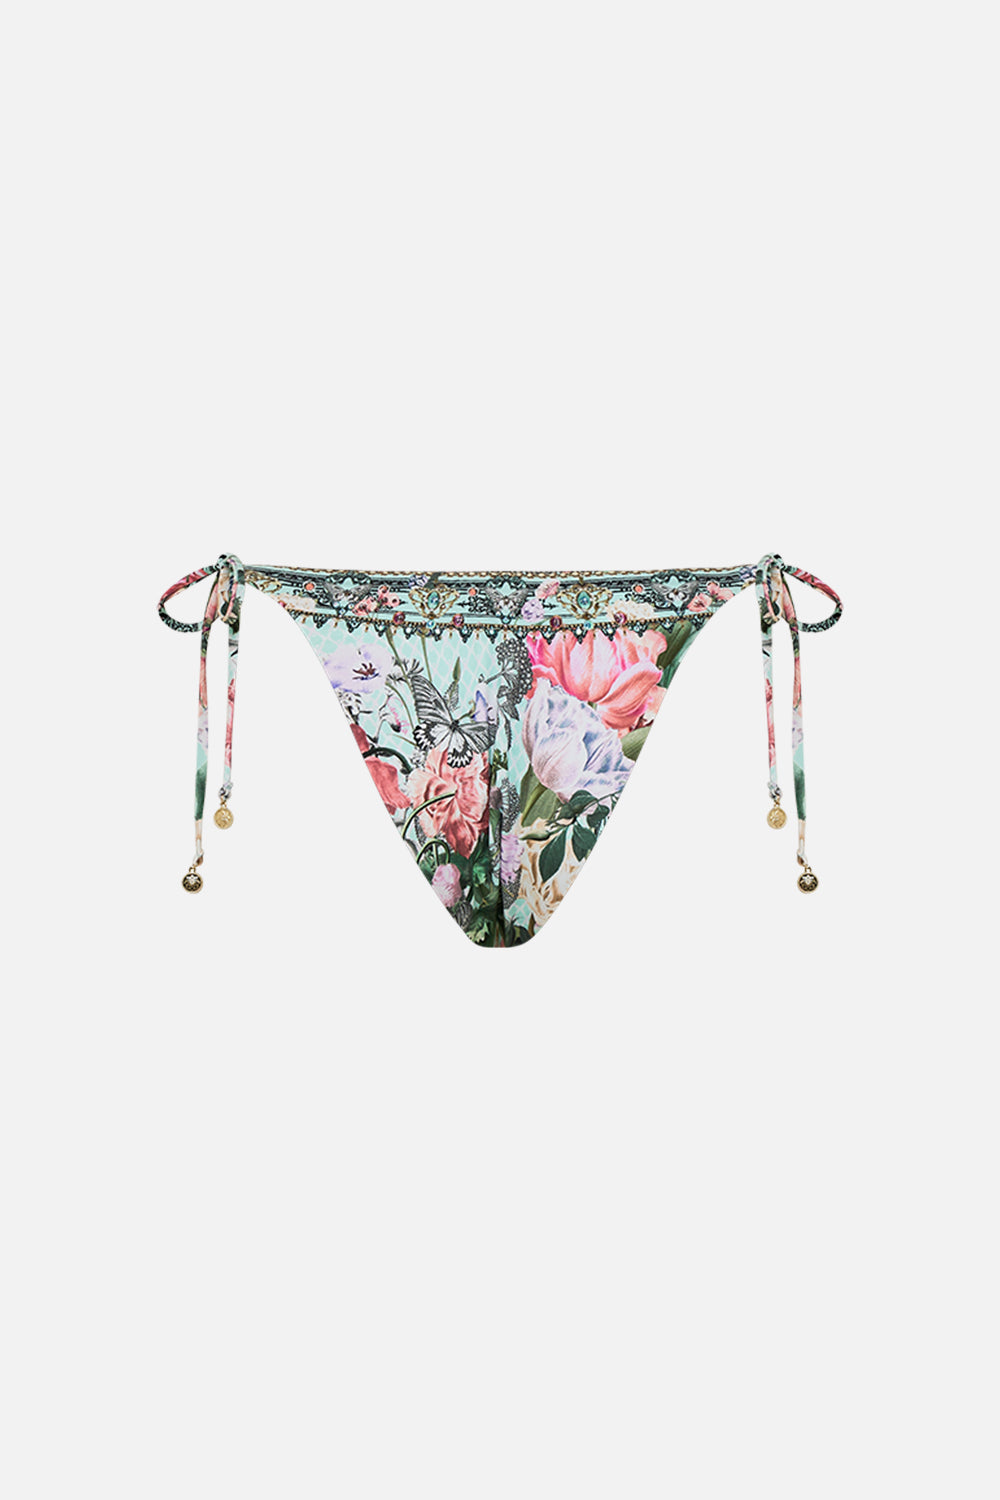 CAMILLA floral side tie skimpy pant in Petal Promise Land